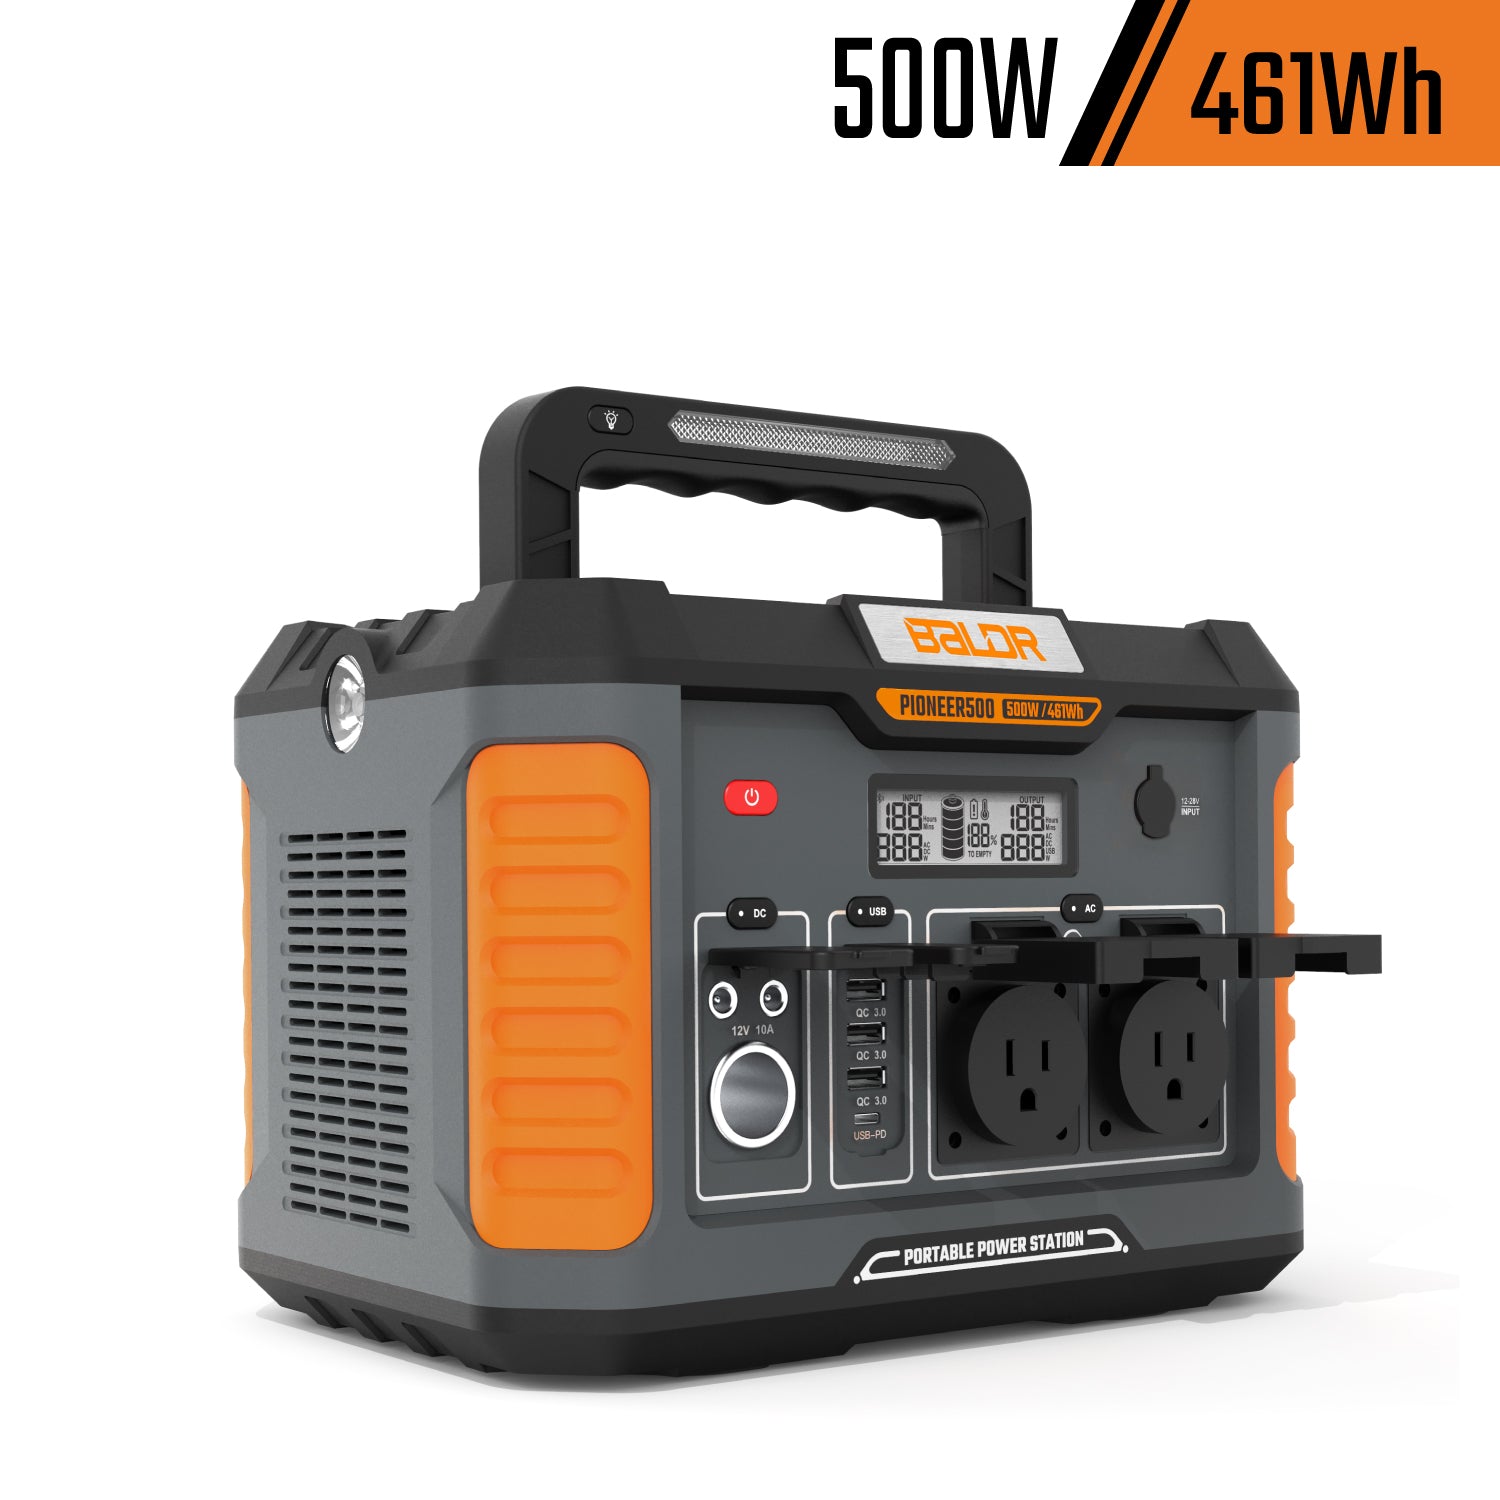 Togo 500W Portable Power Station Camping Solar Generator Backup 461Wh